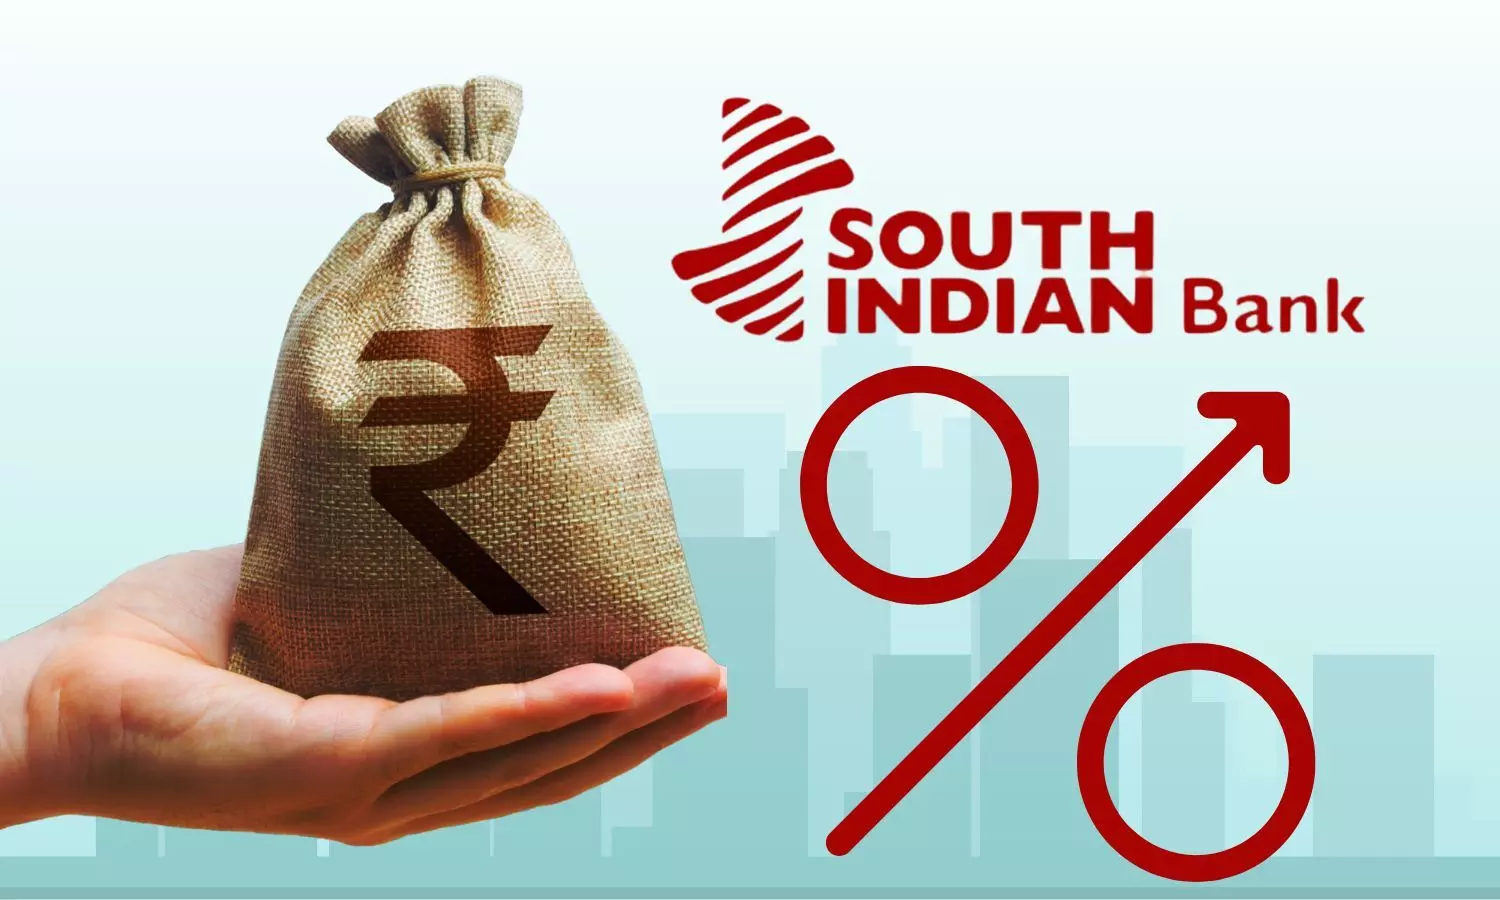 South Indian Bank logo, rupee sack in hand, Percent up